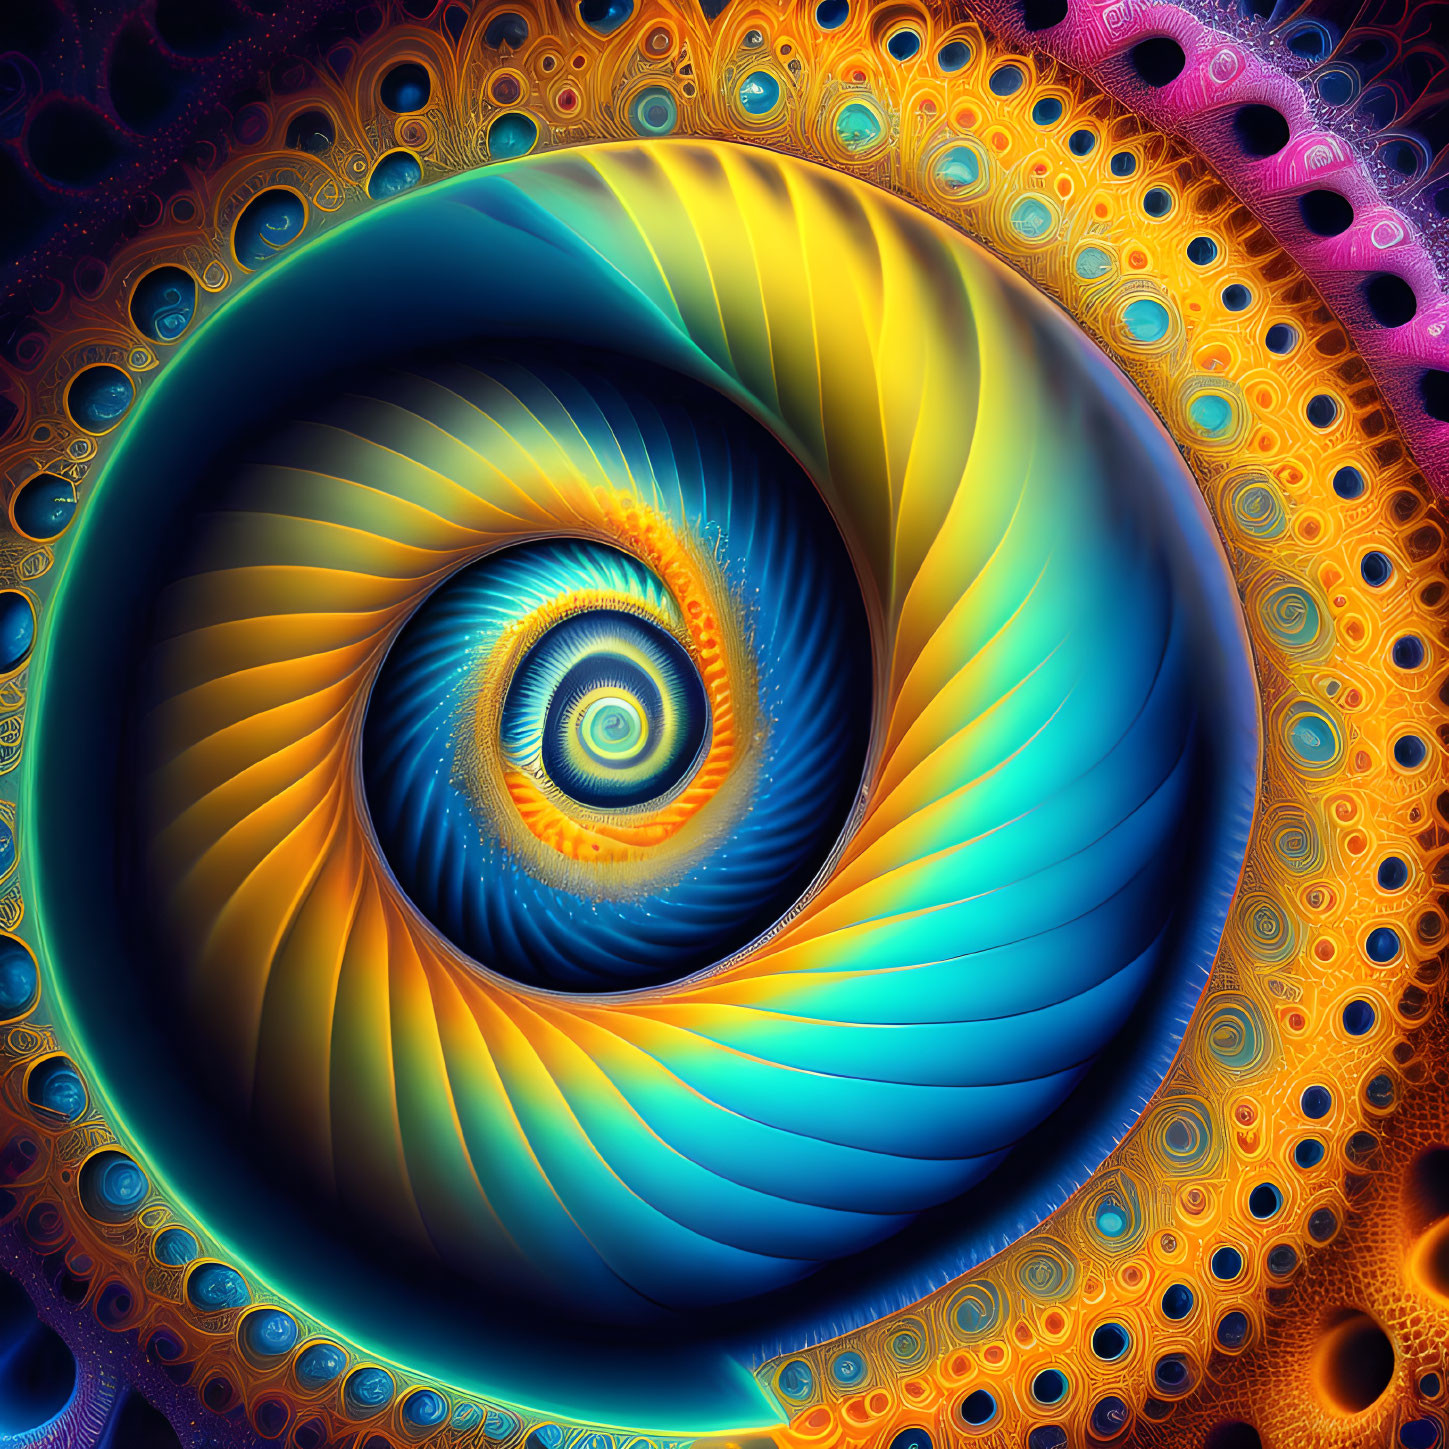 Colorful Fractal Eye with Spiral Pattern in Blue, Yellow, Orange